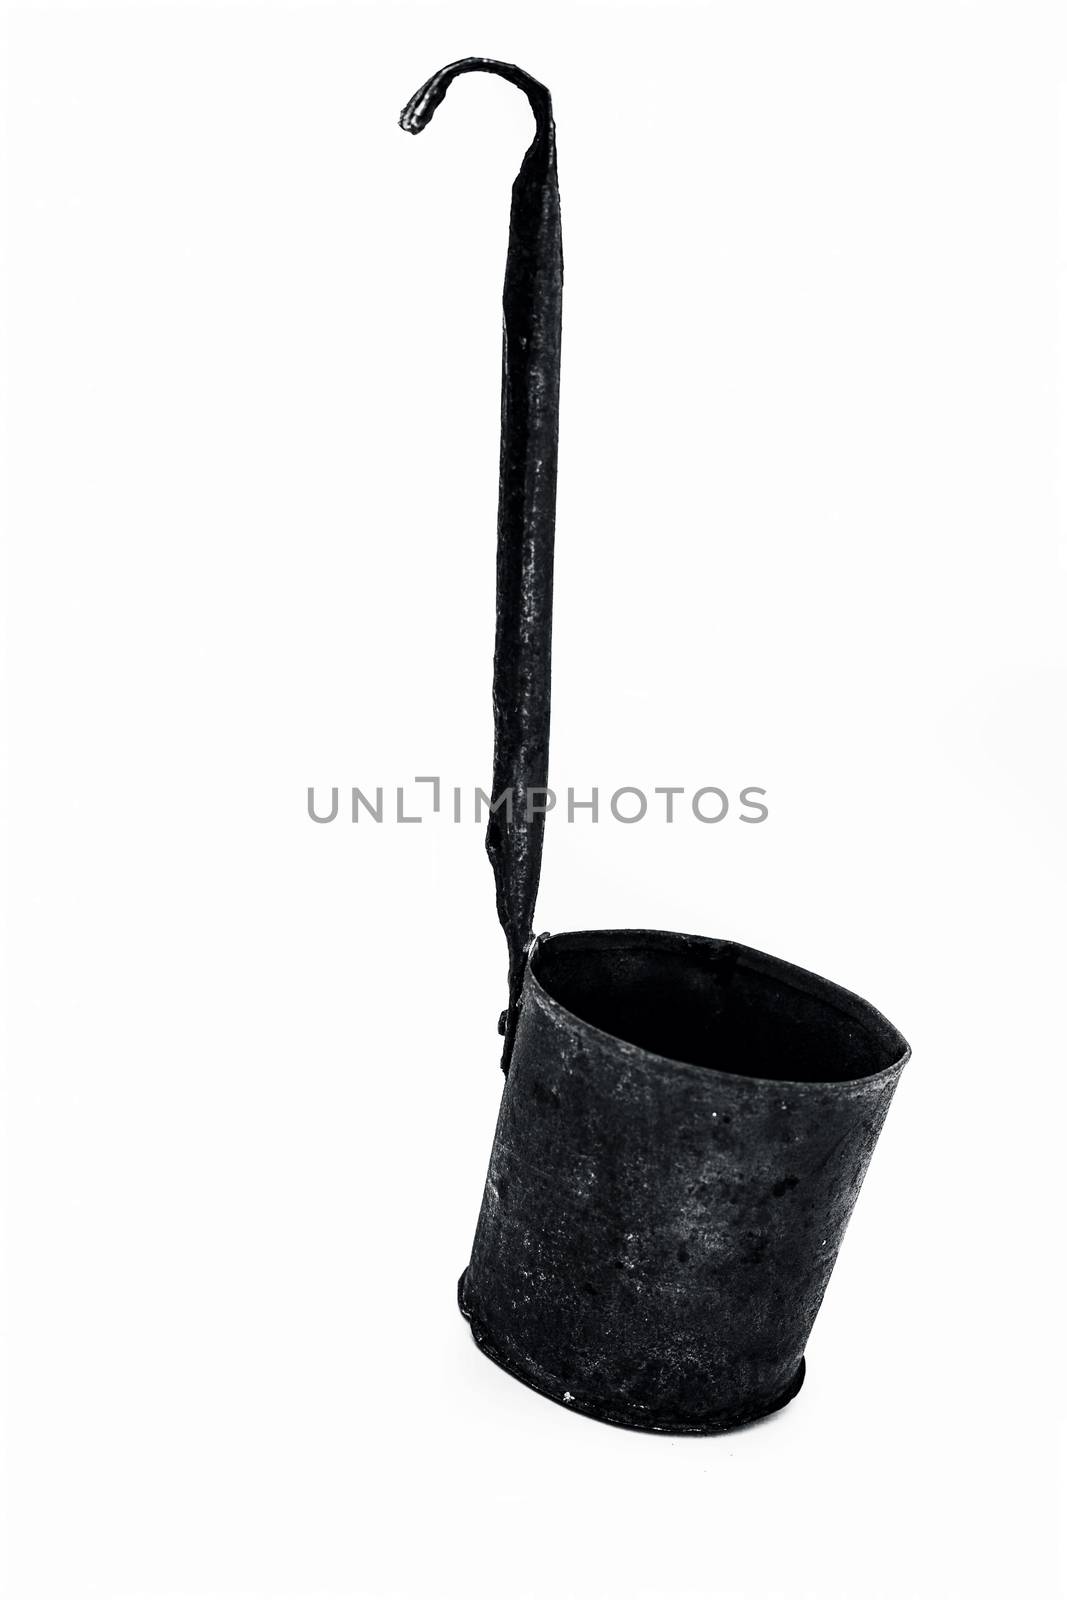 Close up of black colored metal liquid measuring domestic jug or cup isolated on white. by mirzamlk